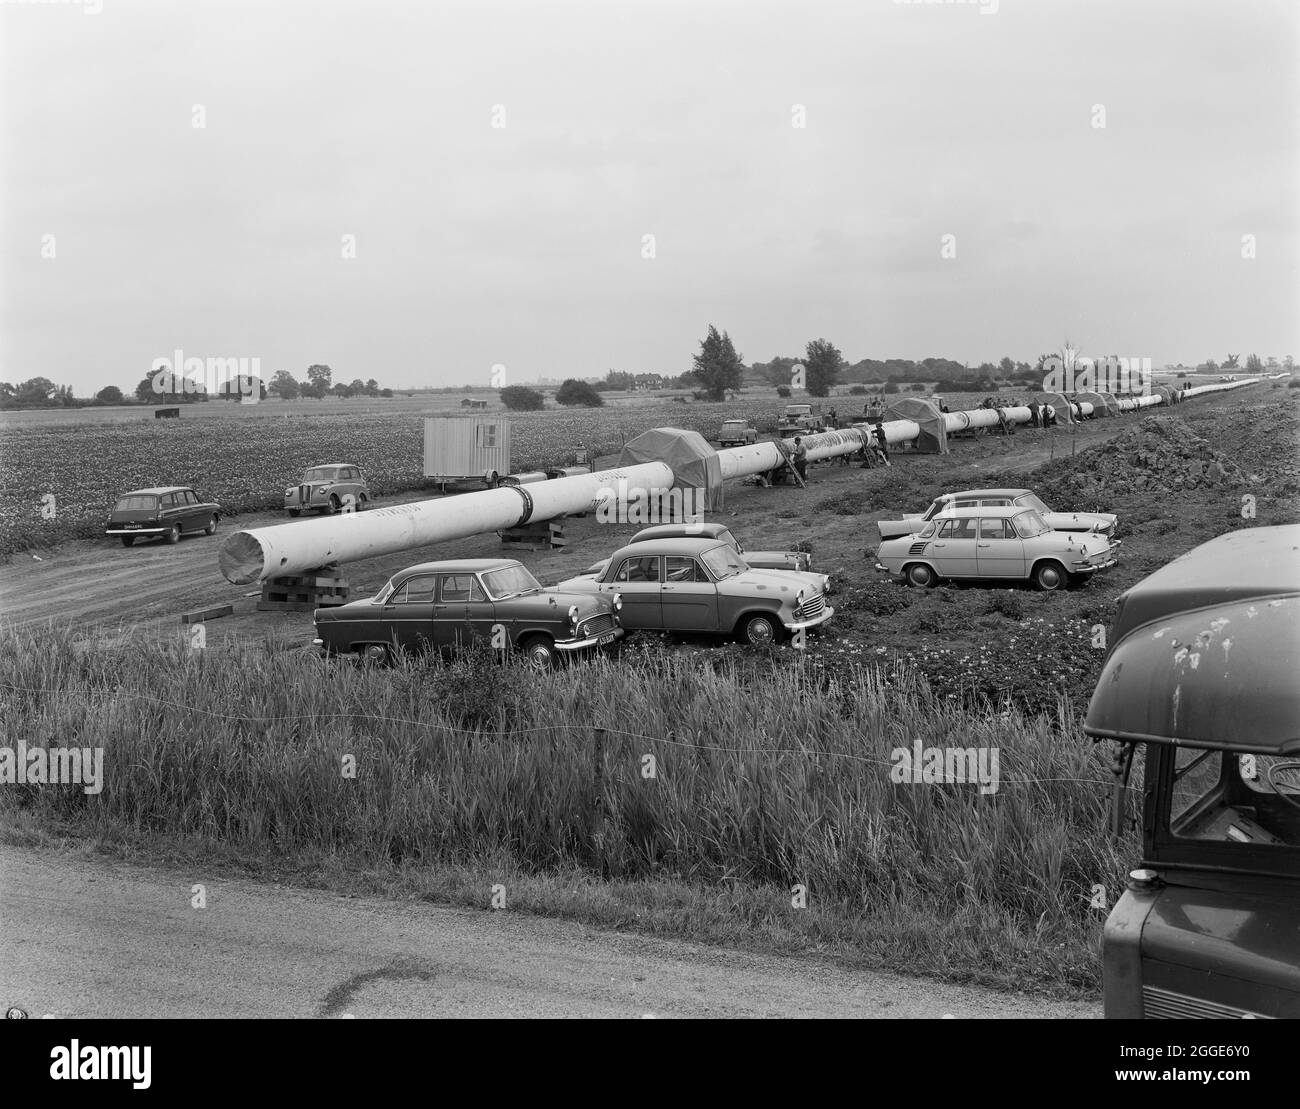 A view of the Fens gas pipeline, showing protective canopies located at joints along the pipe where welding was carried out and workers cars parked alongside the pipeline. Work on laying the Fens gas pipeline started in June 1967 and was a joint venture between Laing Civil Engineering and French companies Entrepose and Grands Travaux de Marseille (GTM) for the Gas Council. Over 600 men worked on the project to lay 36 inch diameter steel pipes starting at West Winch in Norfolk and running to where it linked up with the next contract at Woodcroft Castle in Cambridgeshire. The pipeline crossed fo Stock Photo